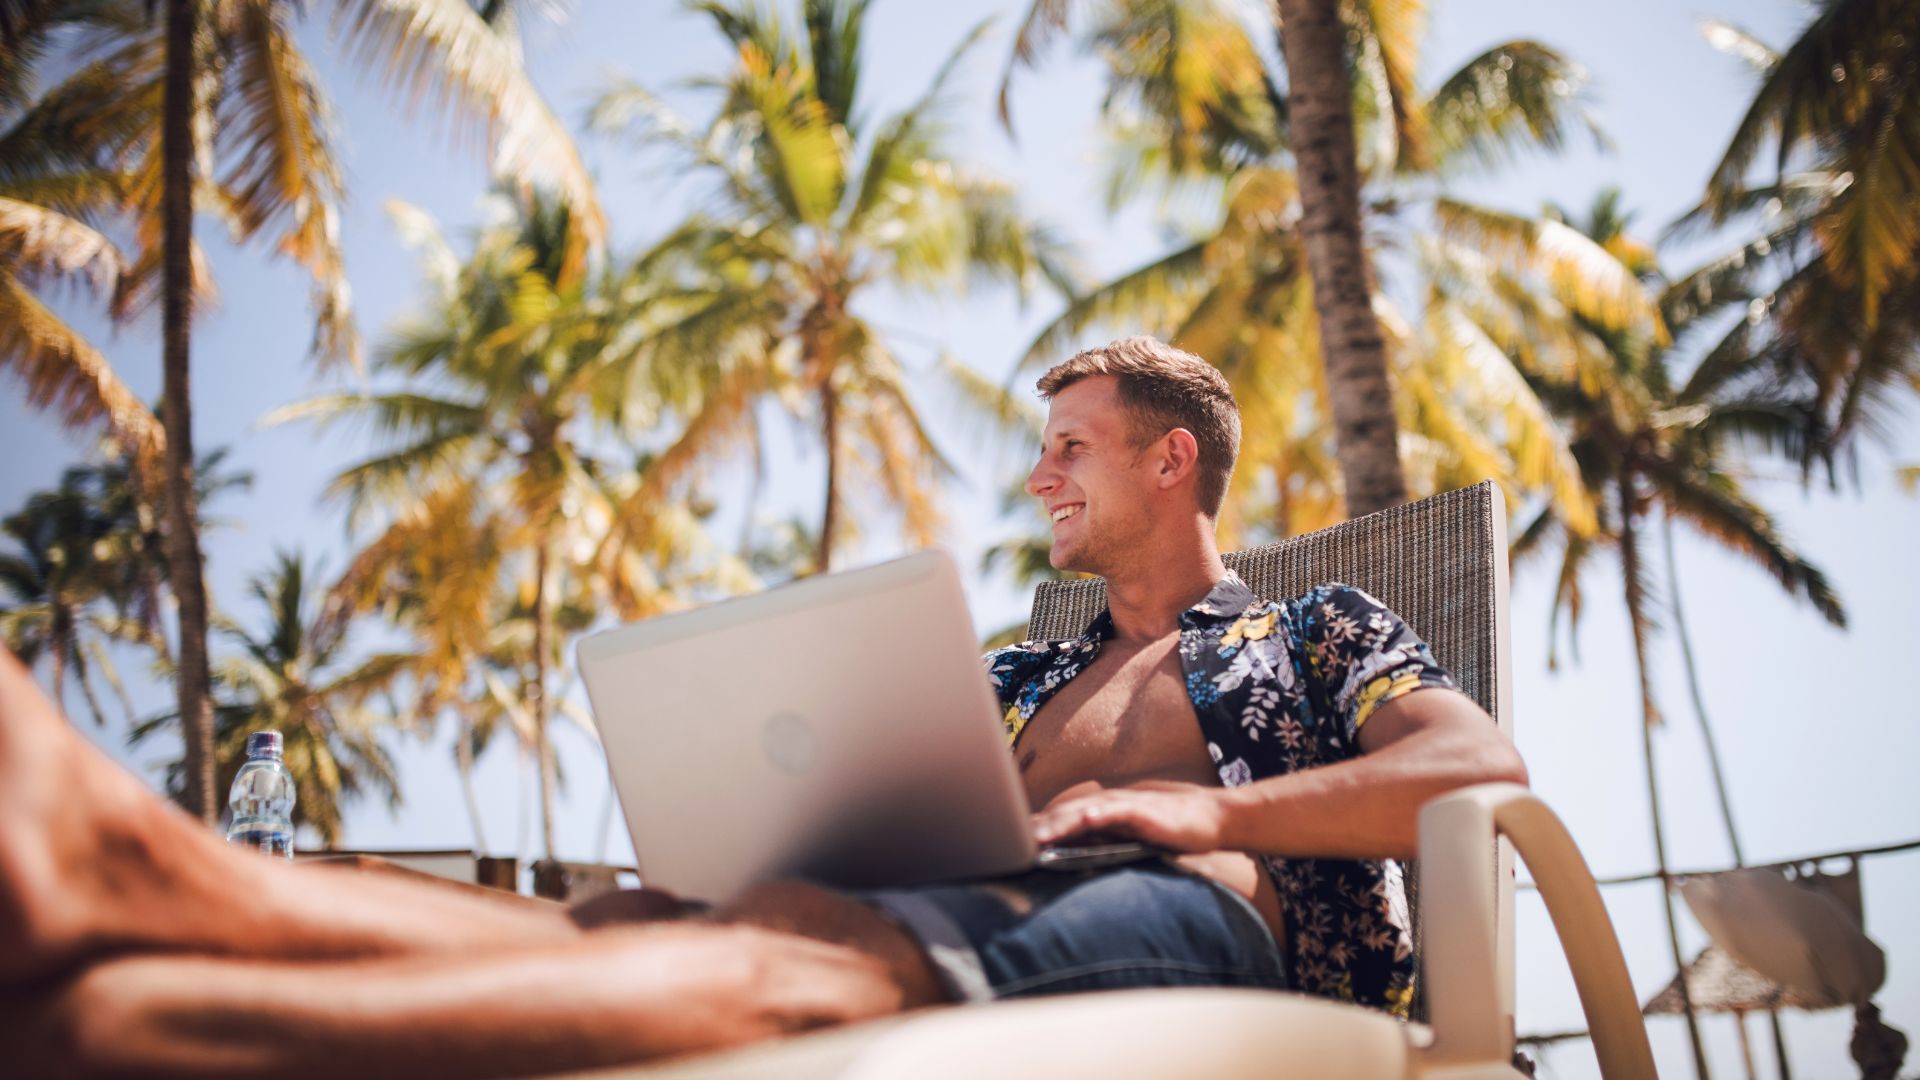 A man with a muscular body sitting on a sunbed wearing a floral Balinese shirt and knee-length shorts is working to create a memorable brand identity under the hot sun by the pool